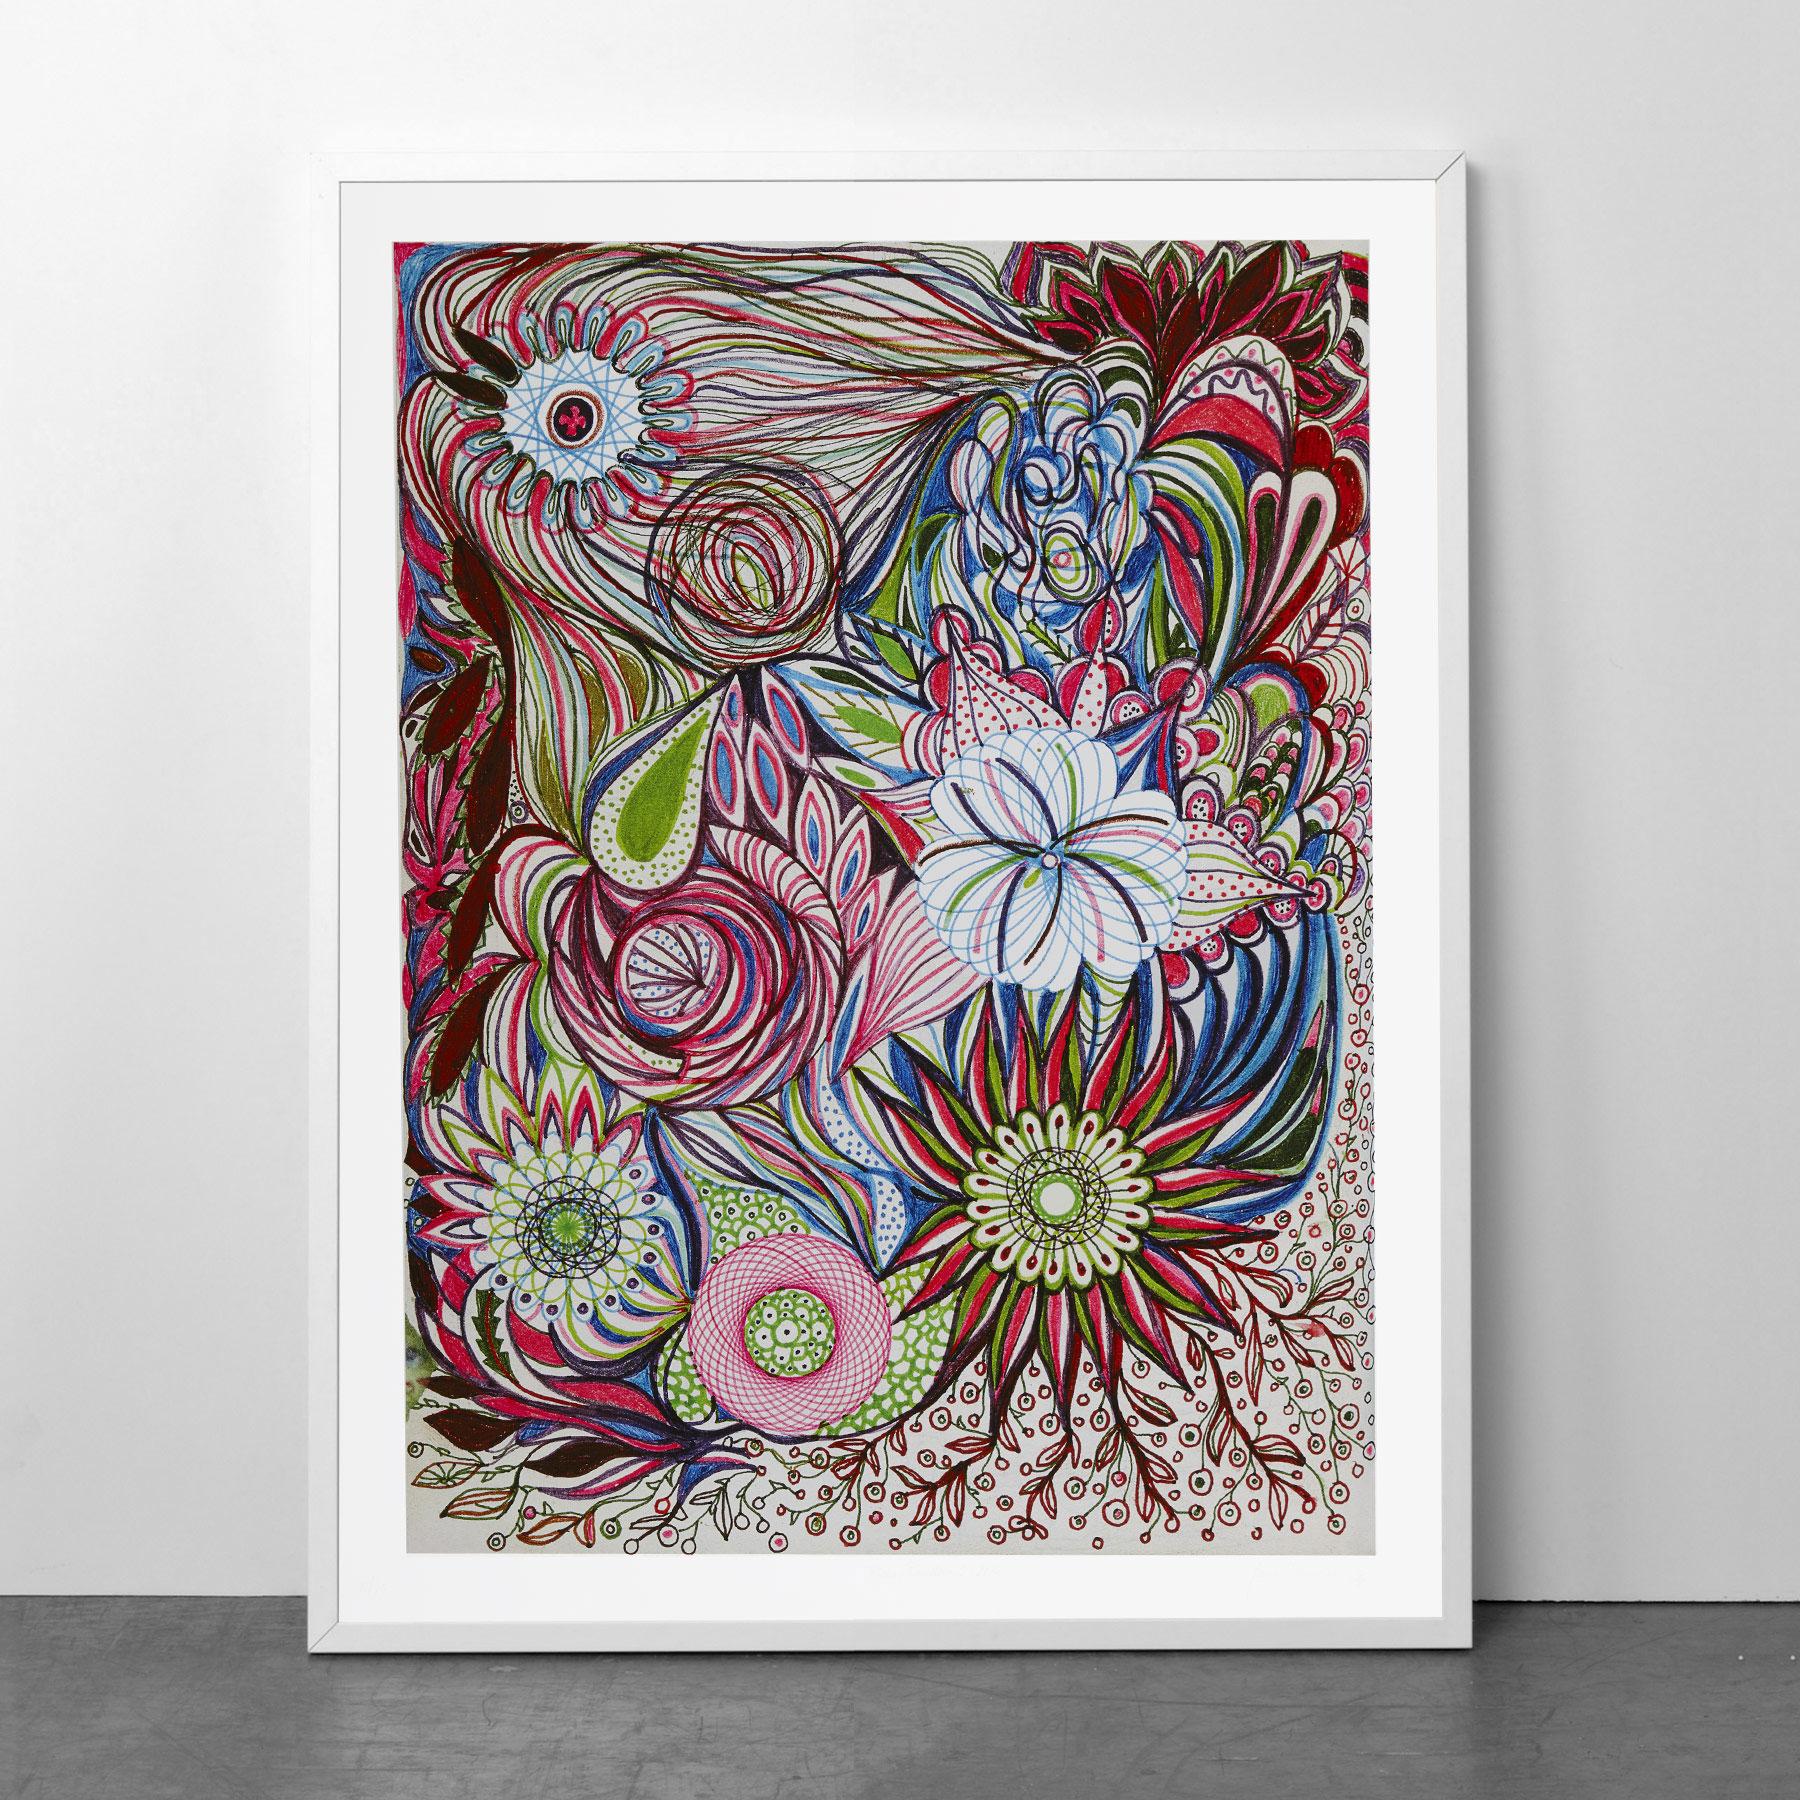 Joana Vasconcelos, Pandora I
Pandora I, Contemporary, 21st Century, Pigment Print, Limited Edition, Edition
Pigment Print
Edition of 25
111.7 x 85.1 cm (44 x 33.5 in)
Signed, numbered and titled accompanied by Certificate of Authenticity
In mint